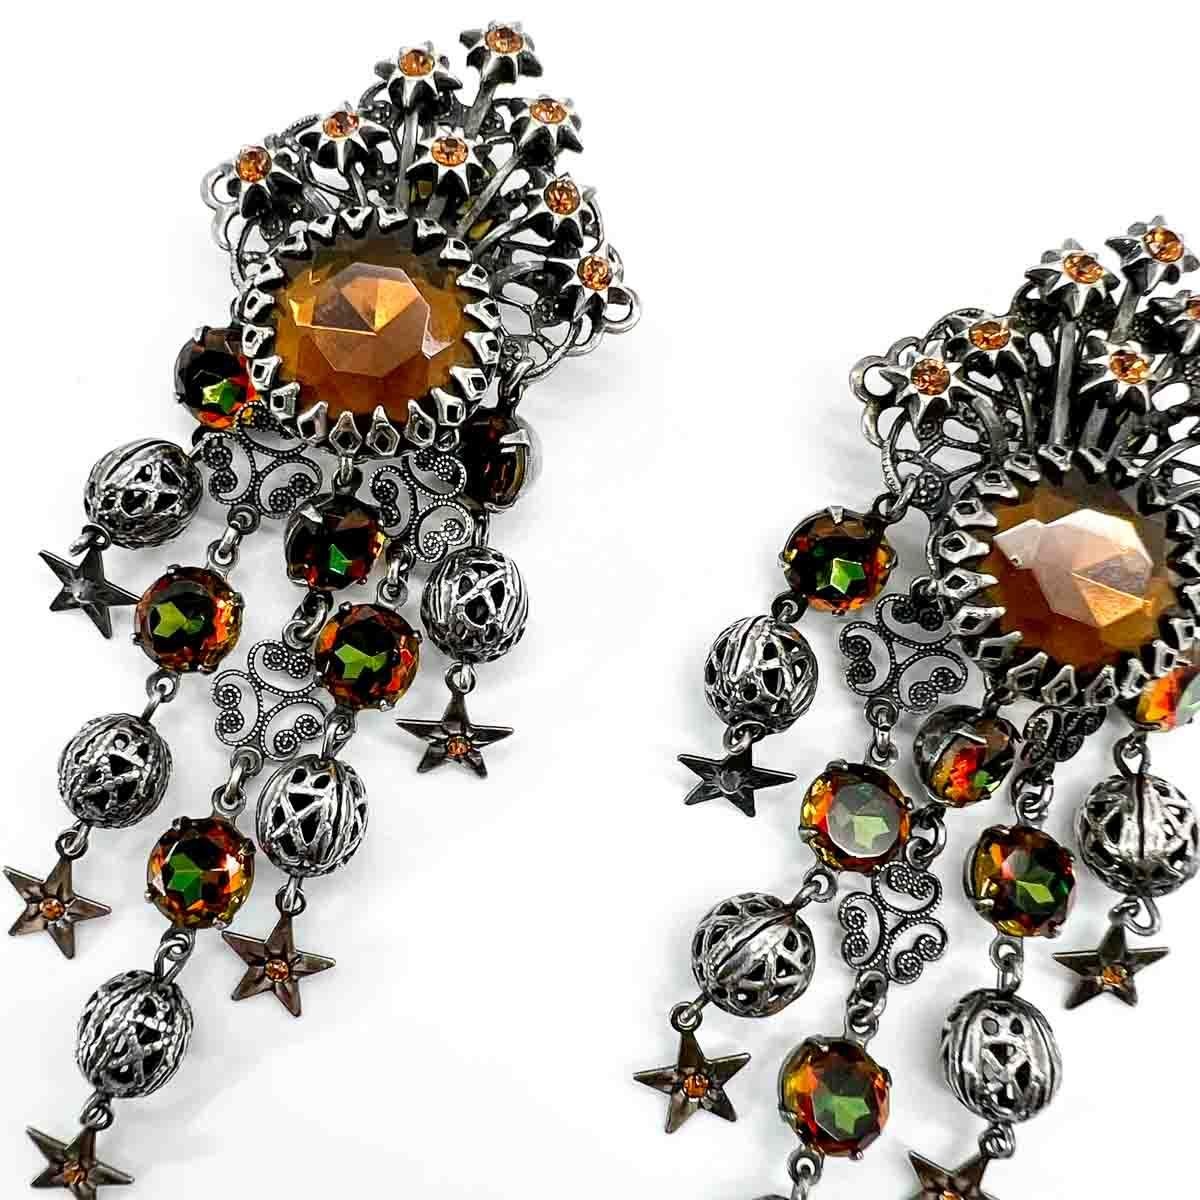 A spectacular pair of Vintage Askew Celestial Earrings. A work of wearable art to adorn your favourite looks.

Founded by Alice Cicolini, a former accessories editor for British Vogue in the late 1970s Askew London is famed for its elaborate,